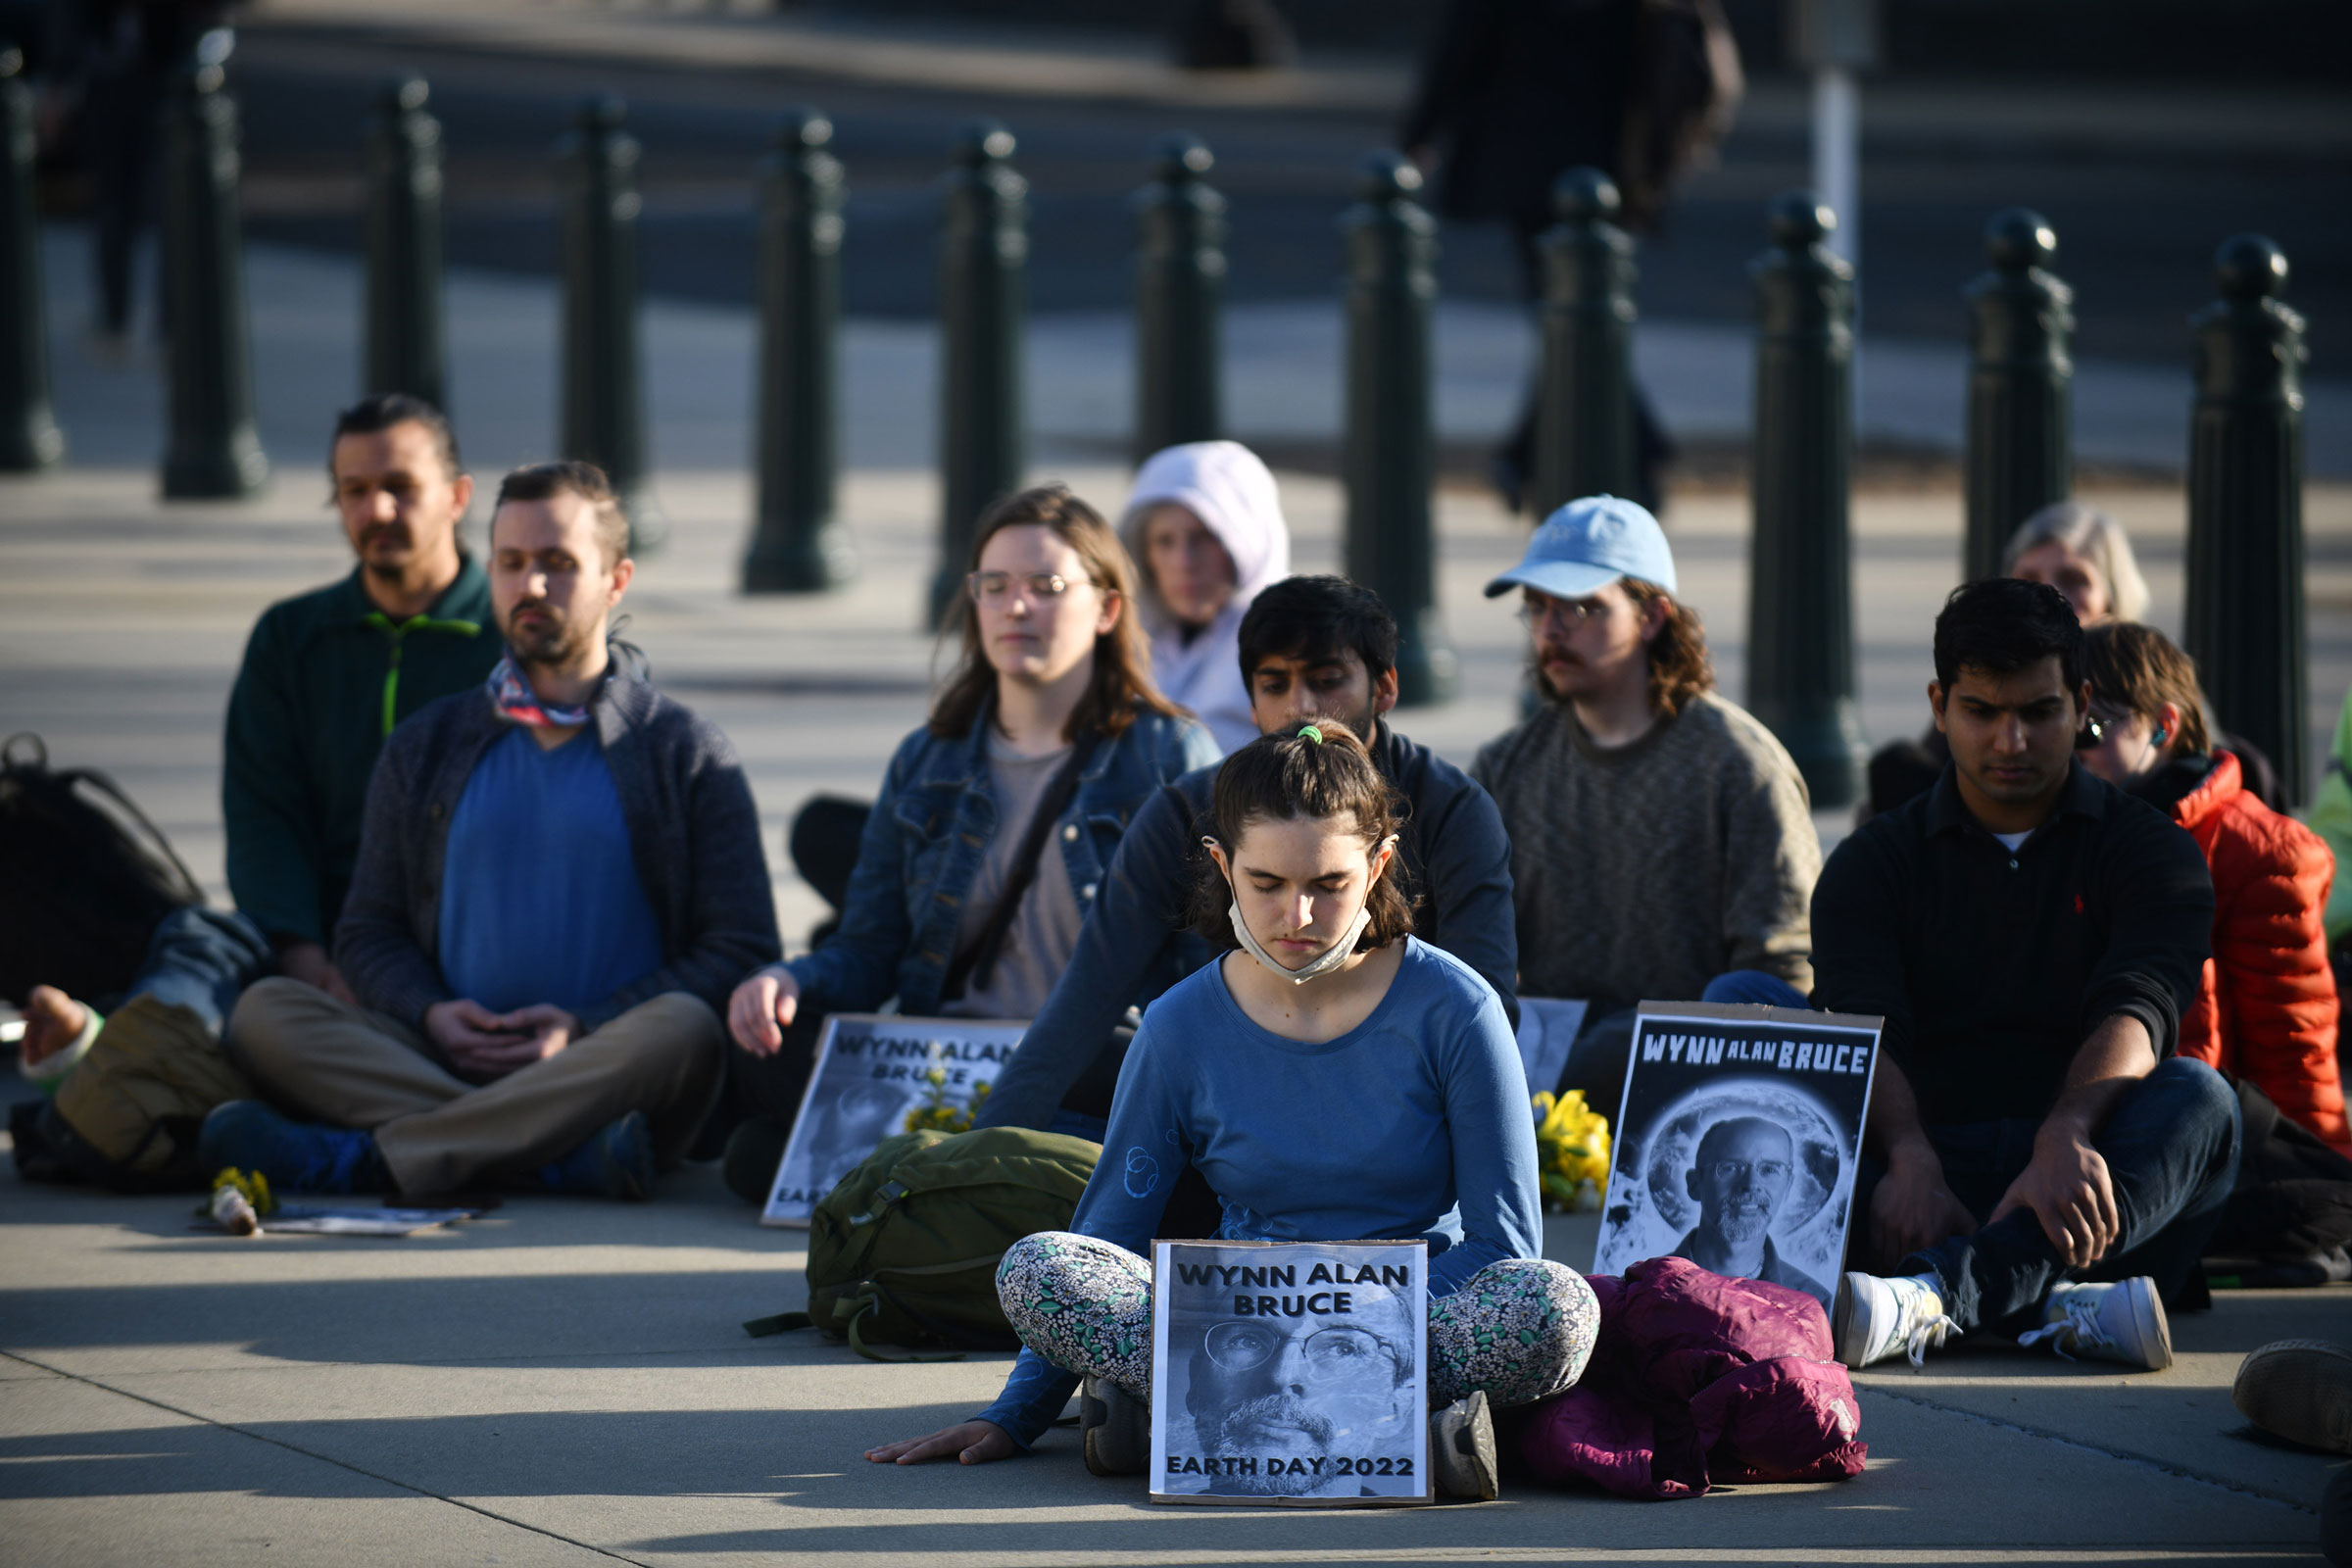 A vigil to honor Wynn Alan Bruce is held in front of the U.S. Supreme Court in Washington, D.C., on April 29, 2022.